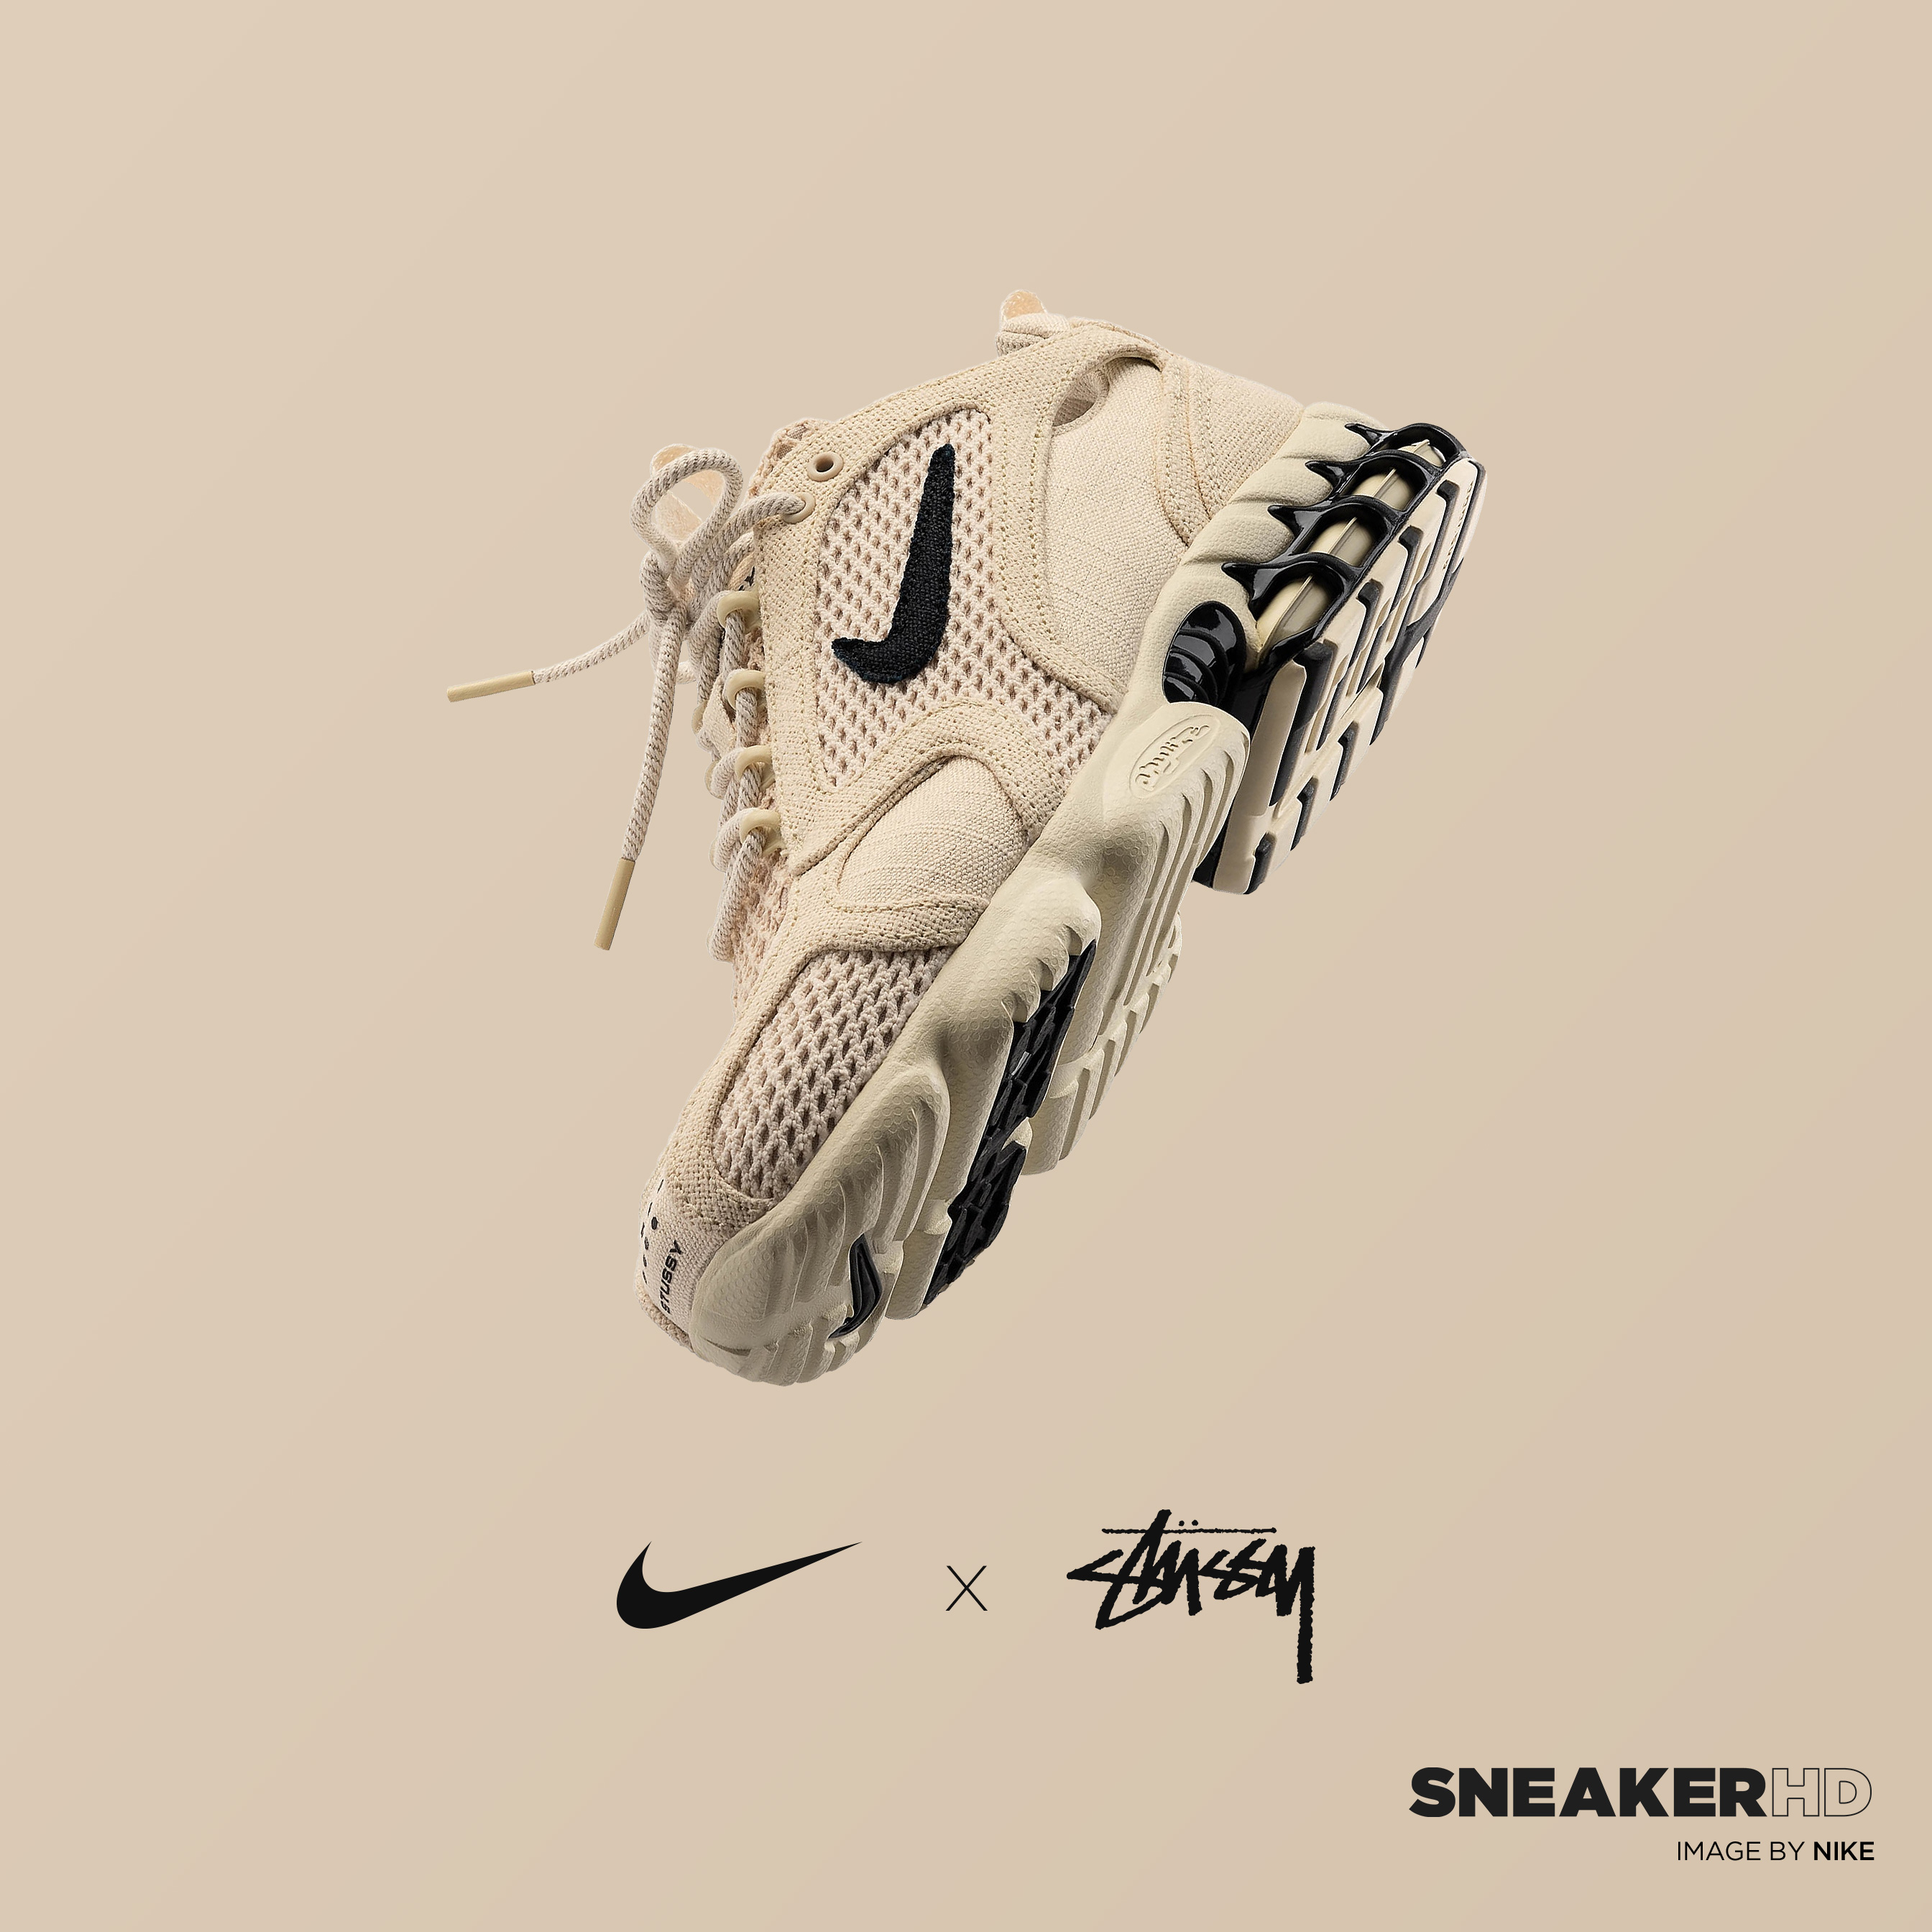 Sneakerhdwallpapers Com Your Favorite Sneakers In 4k Retina Mobile And Hd Wallpaper Resolutions Nike X Stussy Archives Sneakerhdwallpapers Com Your Favorite Sneakers In 4k Retina Mobile And Hd Wallpaper Resolutions